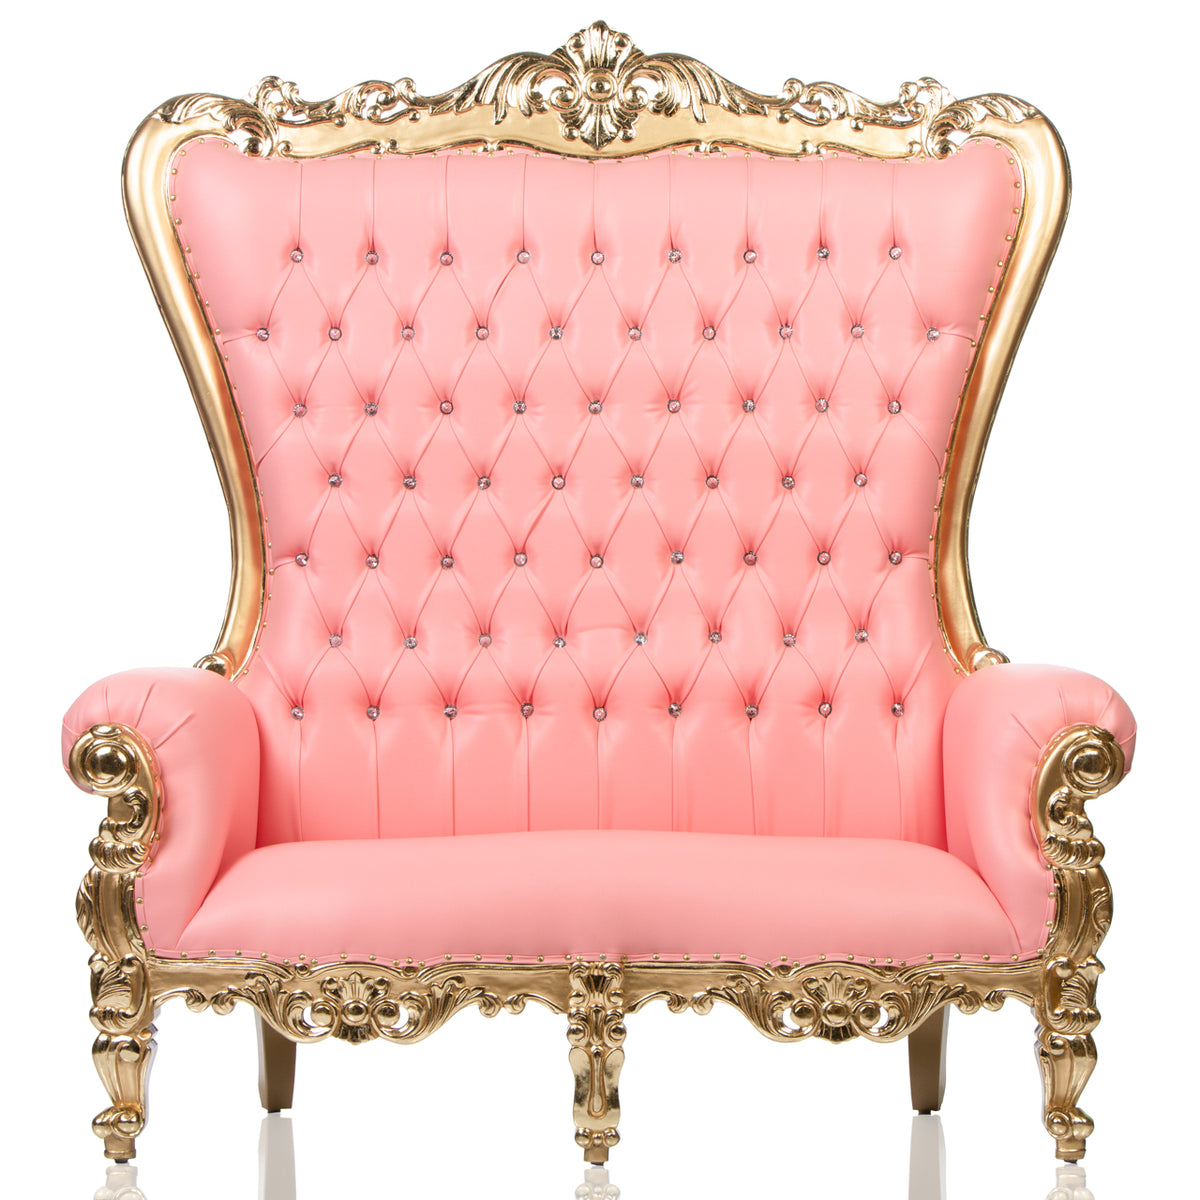 "Bubble Gum" Double Throne Pink/Gold (West Coast)